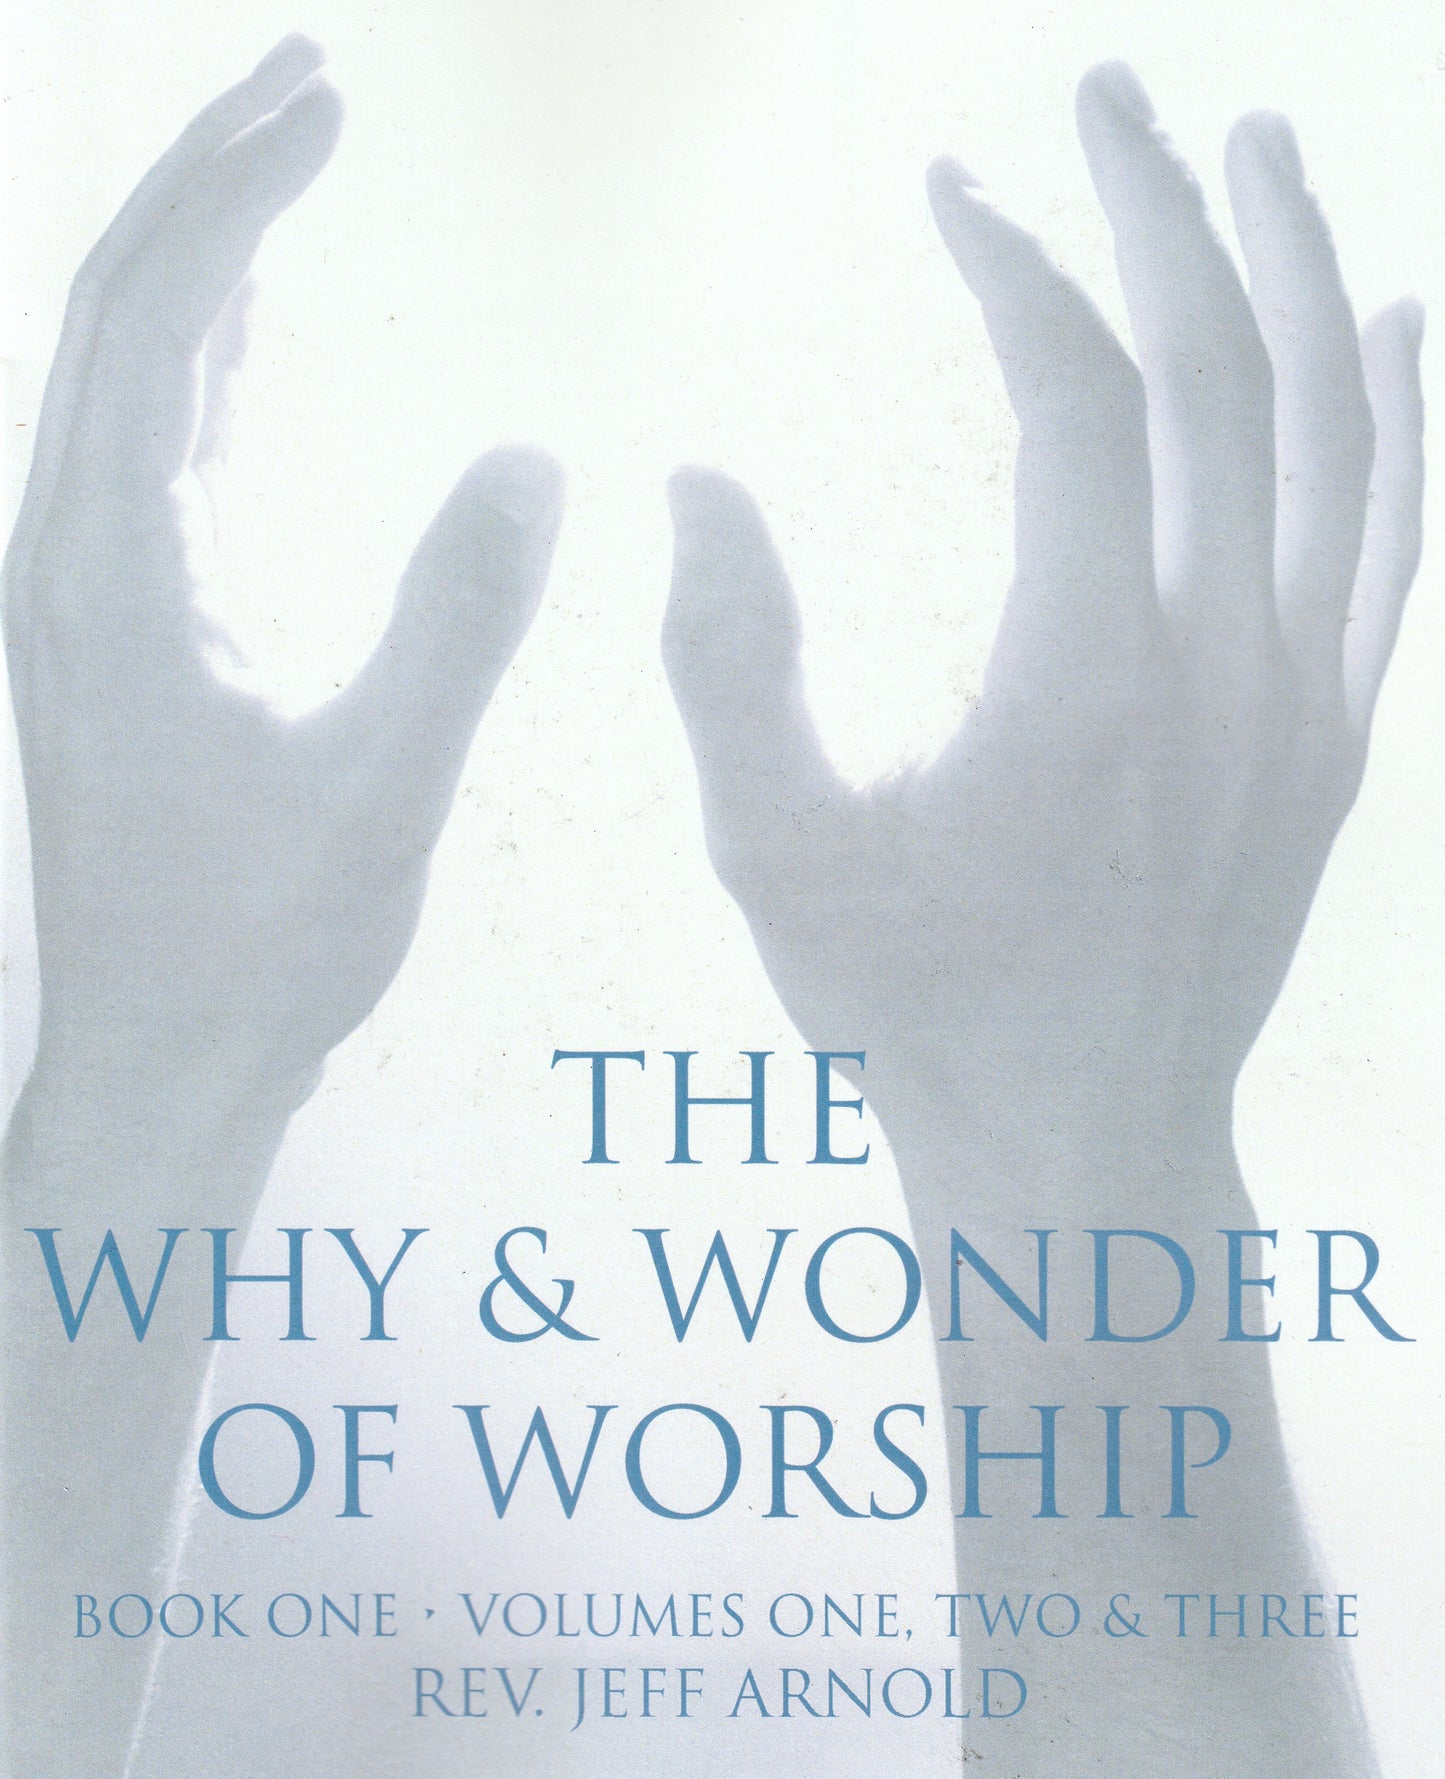 The Why & Wonder Of Worship - Book One     -  284 pages  -  $25